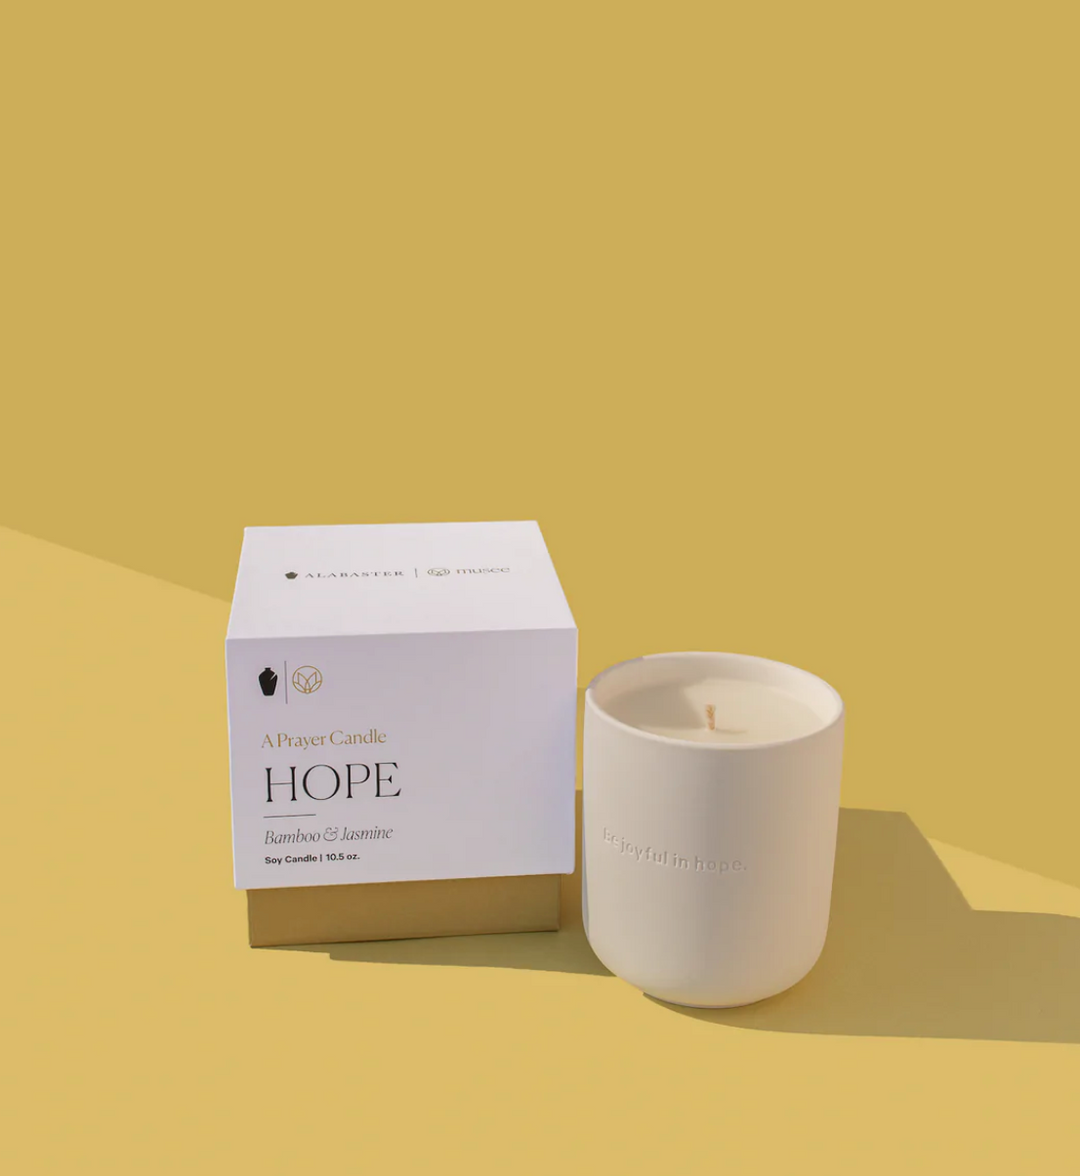 Musee: Hope Prayer Candle